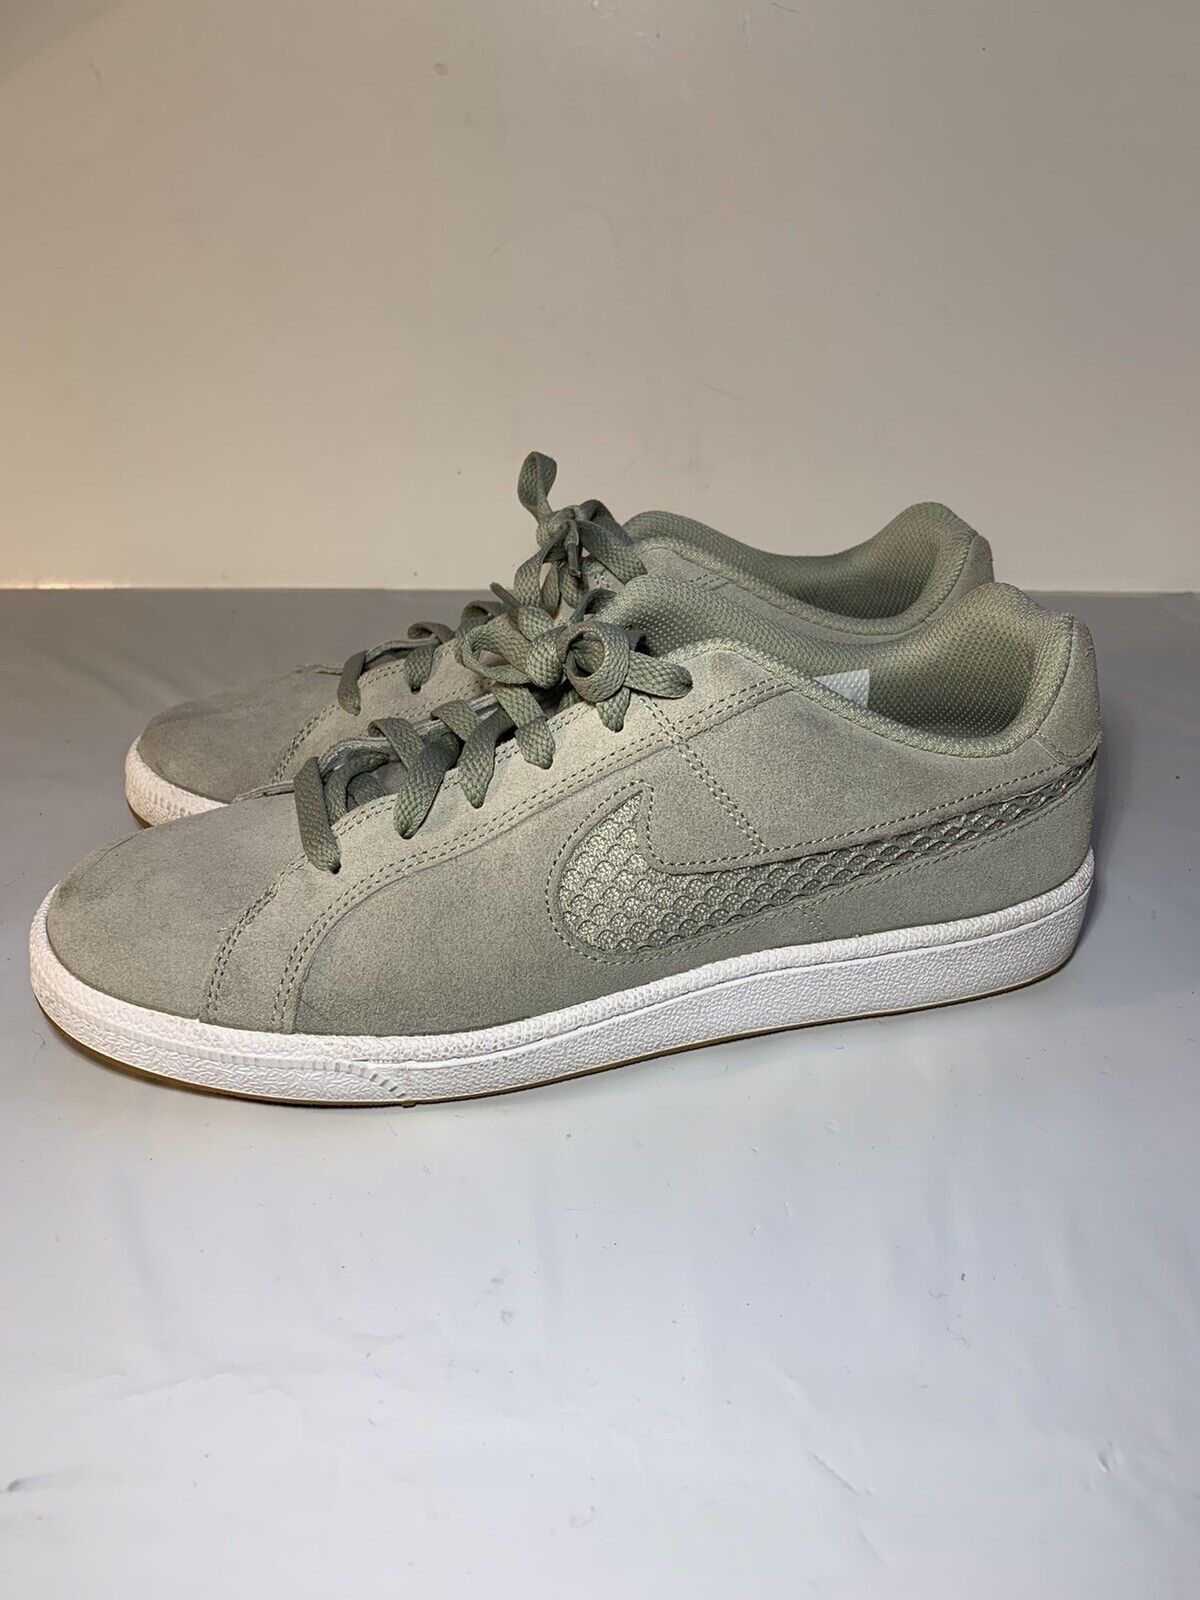 Court Premium Casual Sneakers Low Top Suede Green Womens 10 | eBay